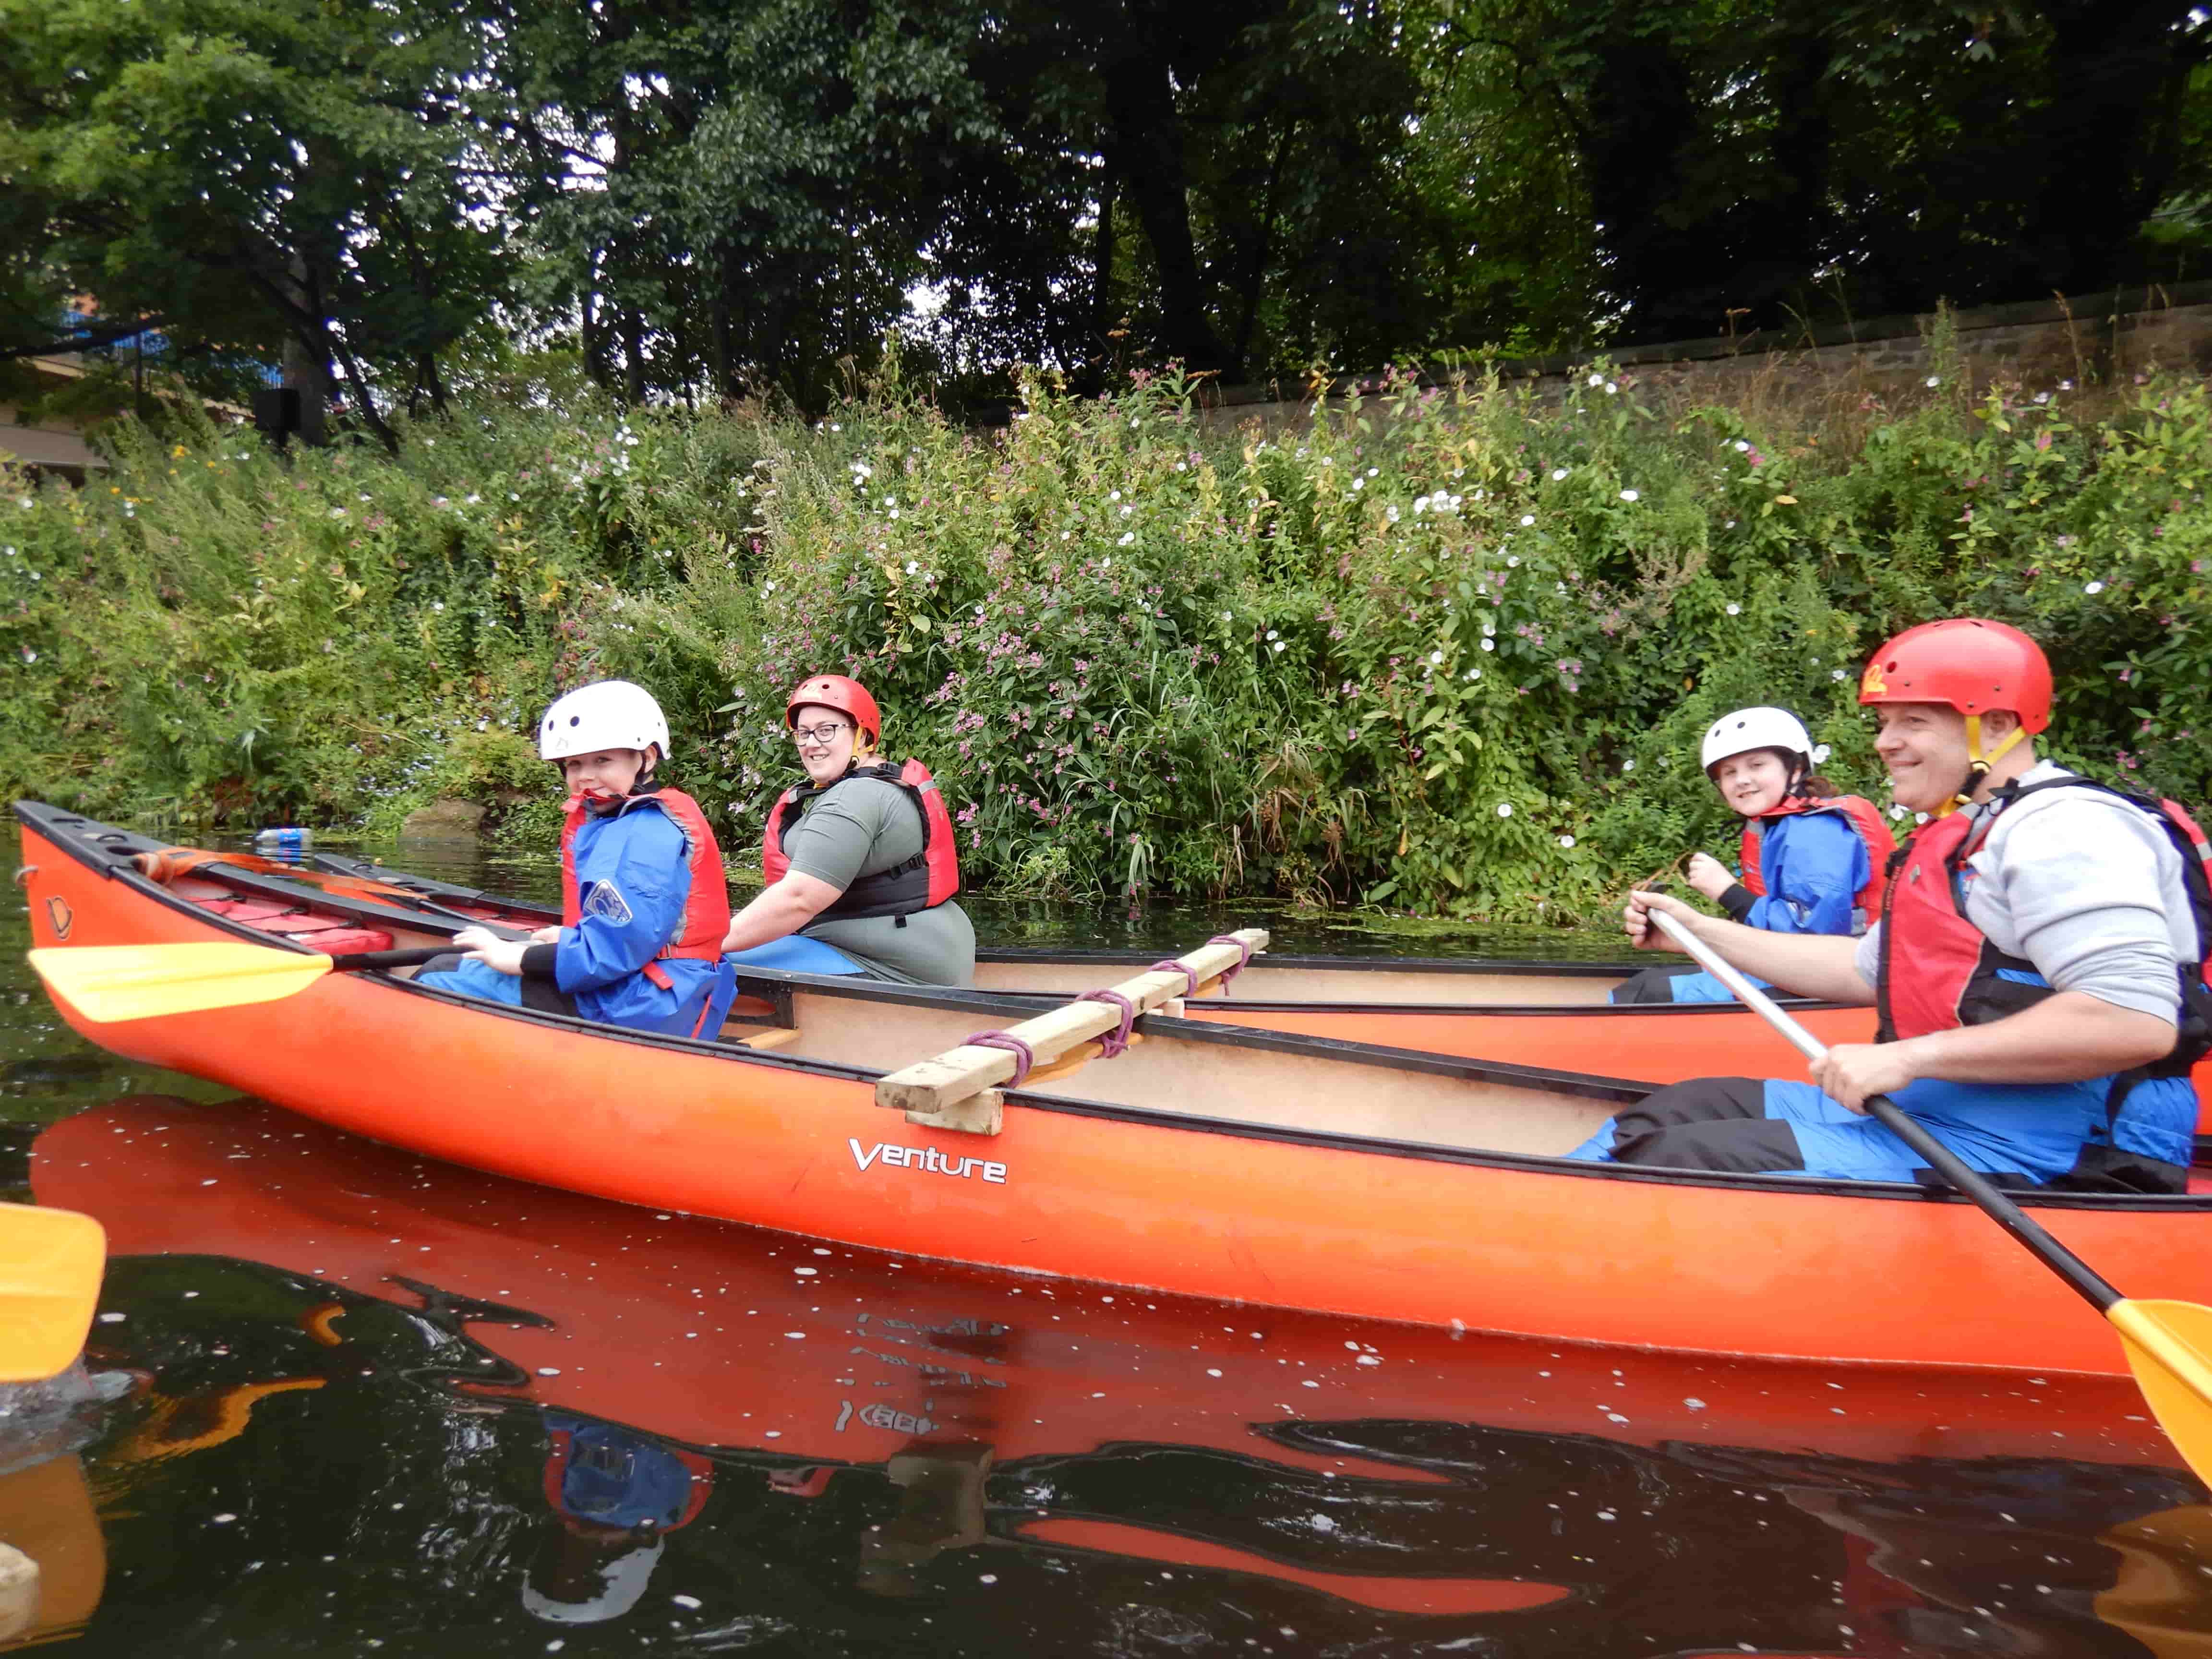 Adventure Access helps disabled children stay active during COVID ...